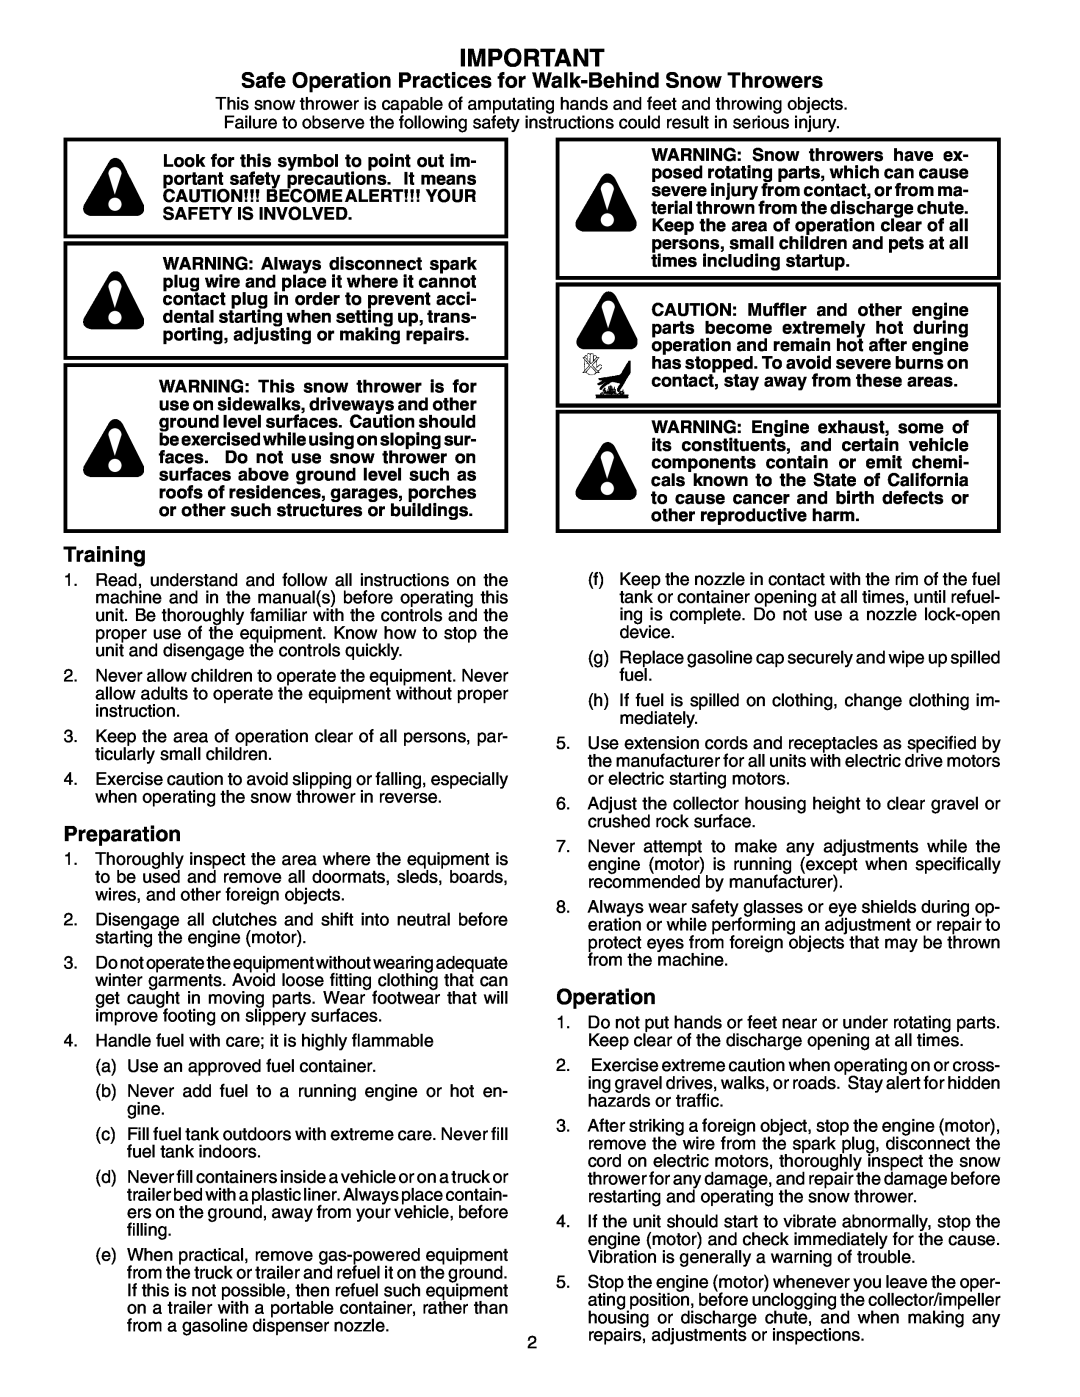 Poulan 199350 owner manual Safe Operation Practices for Walk-Behind Snow Throwers, Training, Preparation 